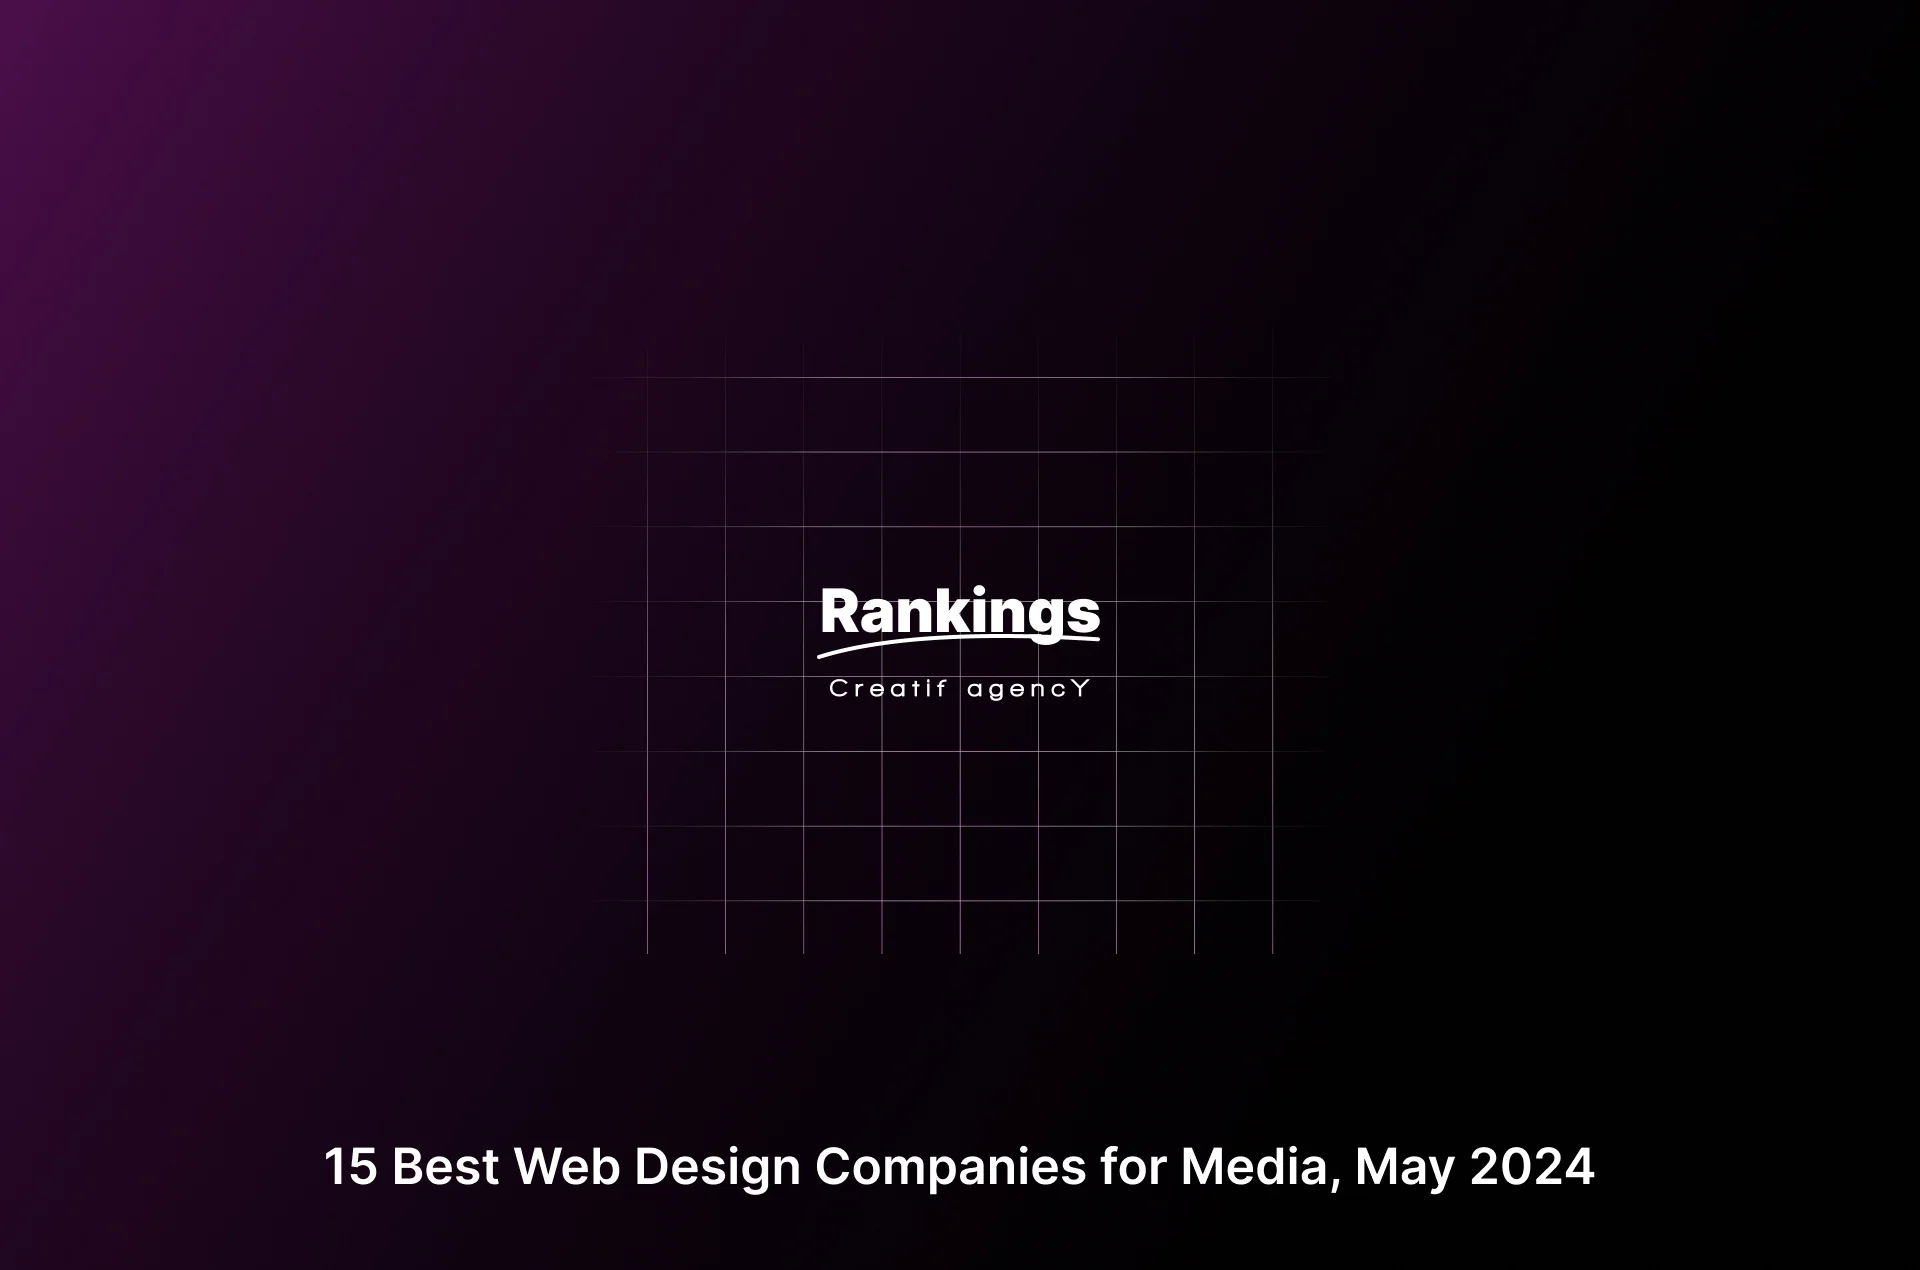 15 Best Web Design Companies for Media, May 2024